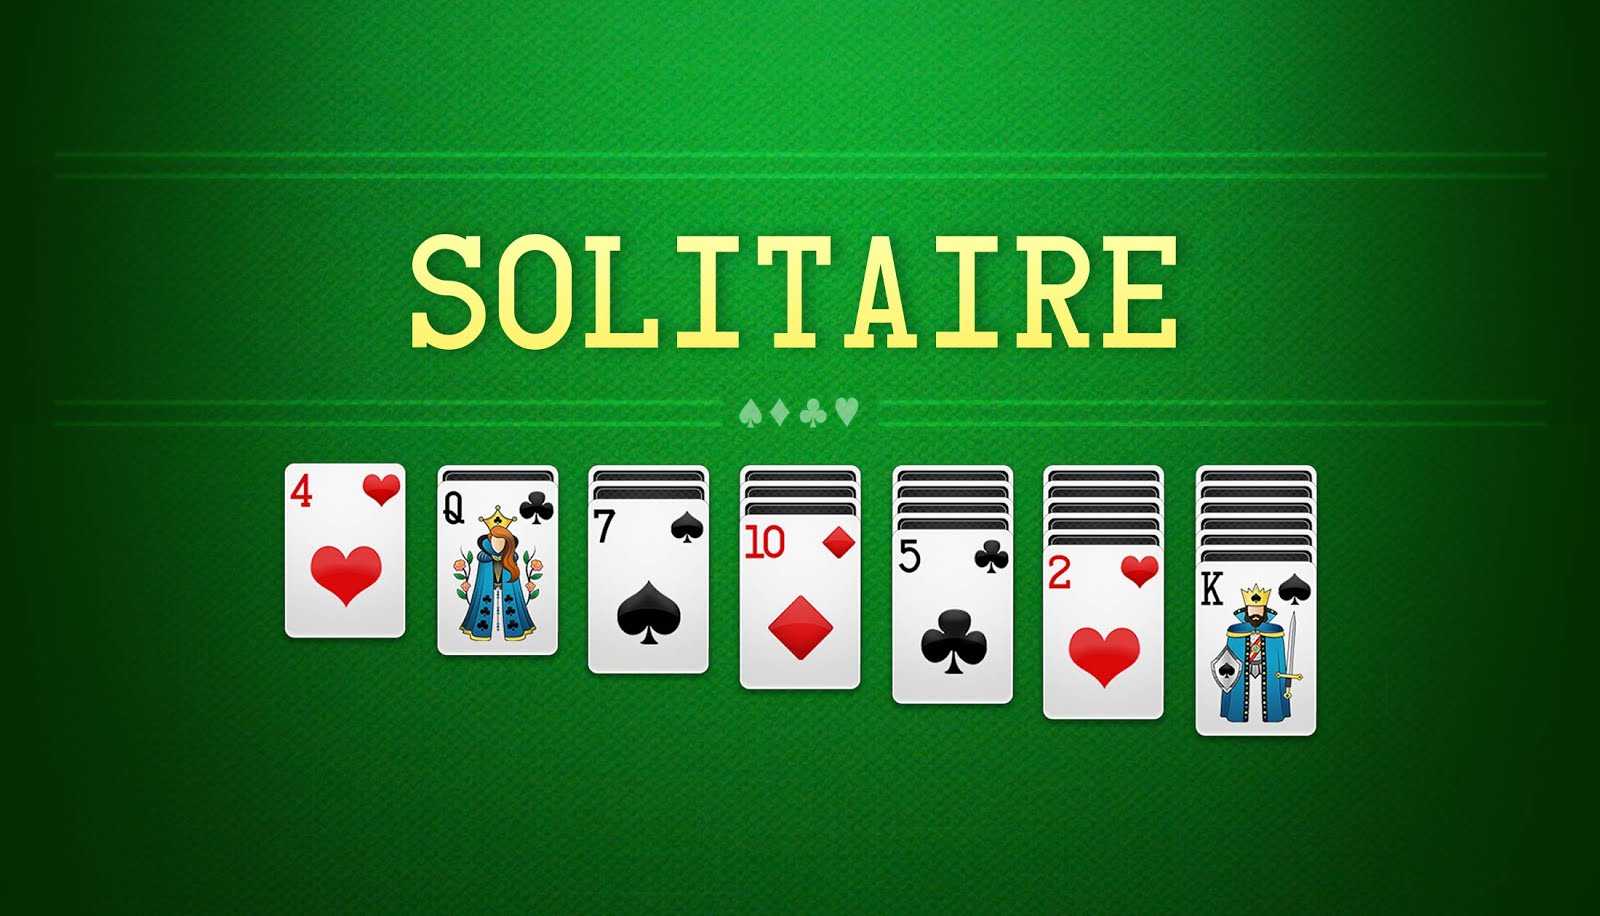 Boards for the solitaire games I play